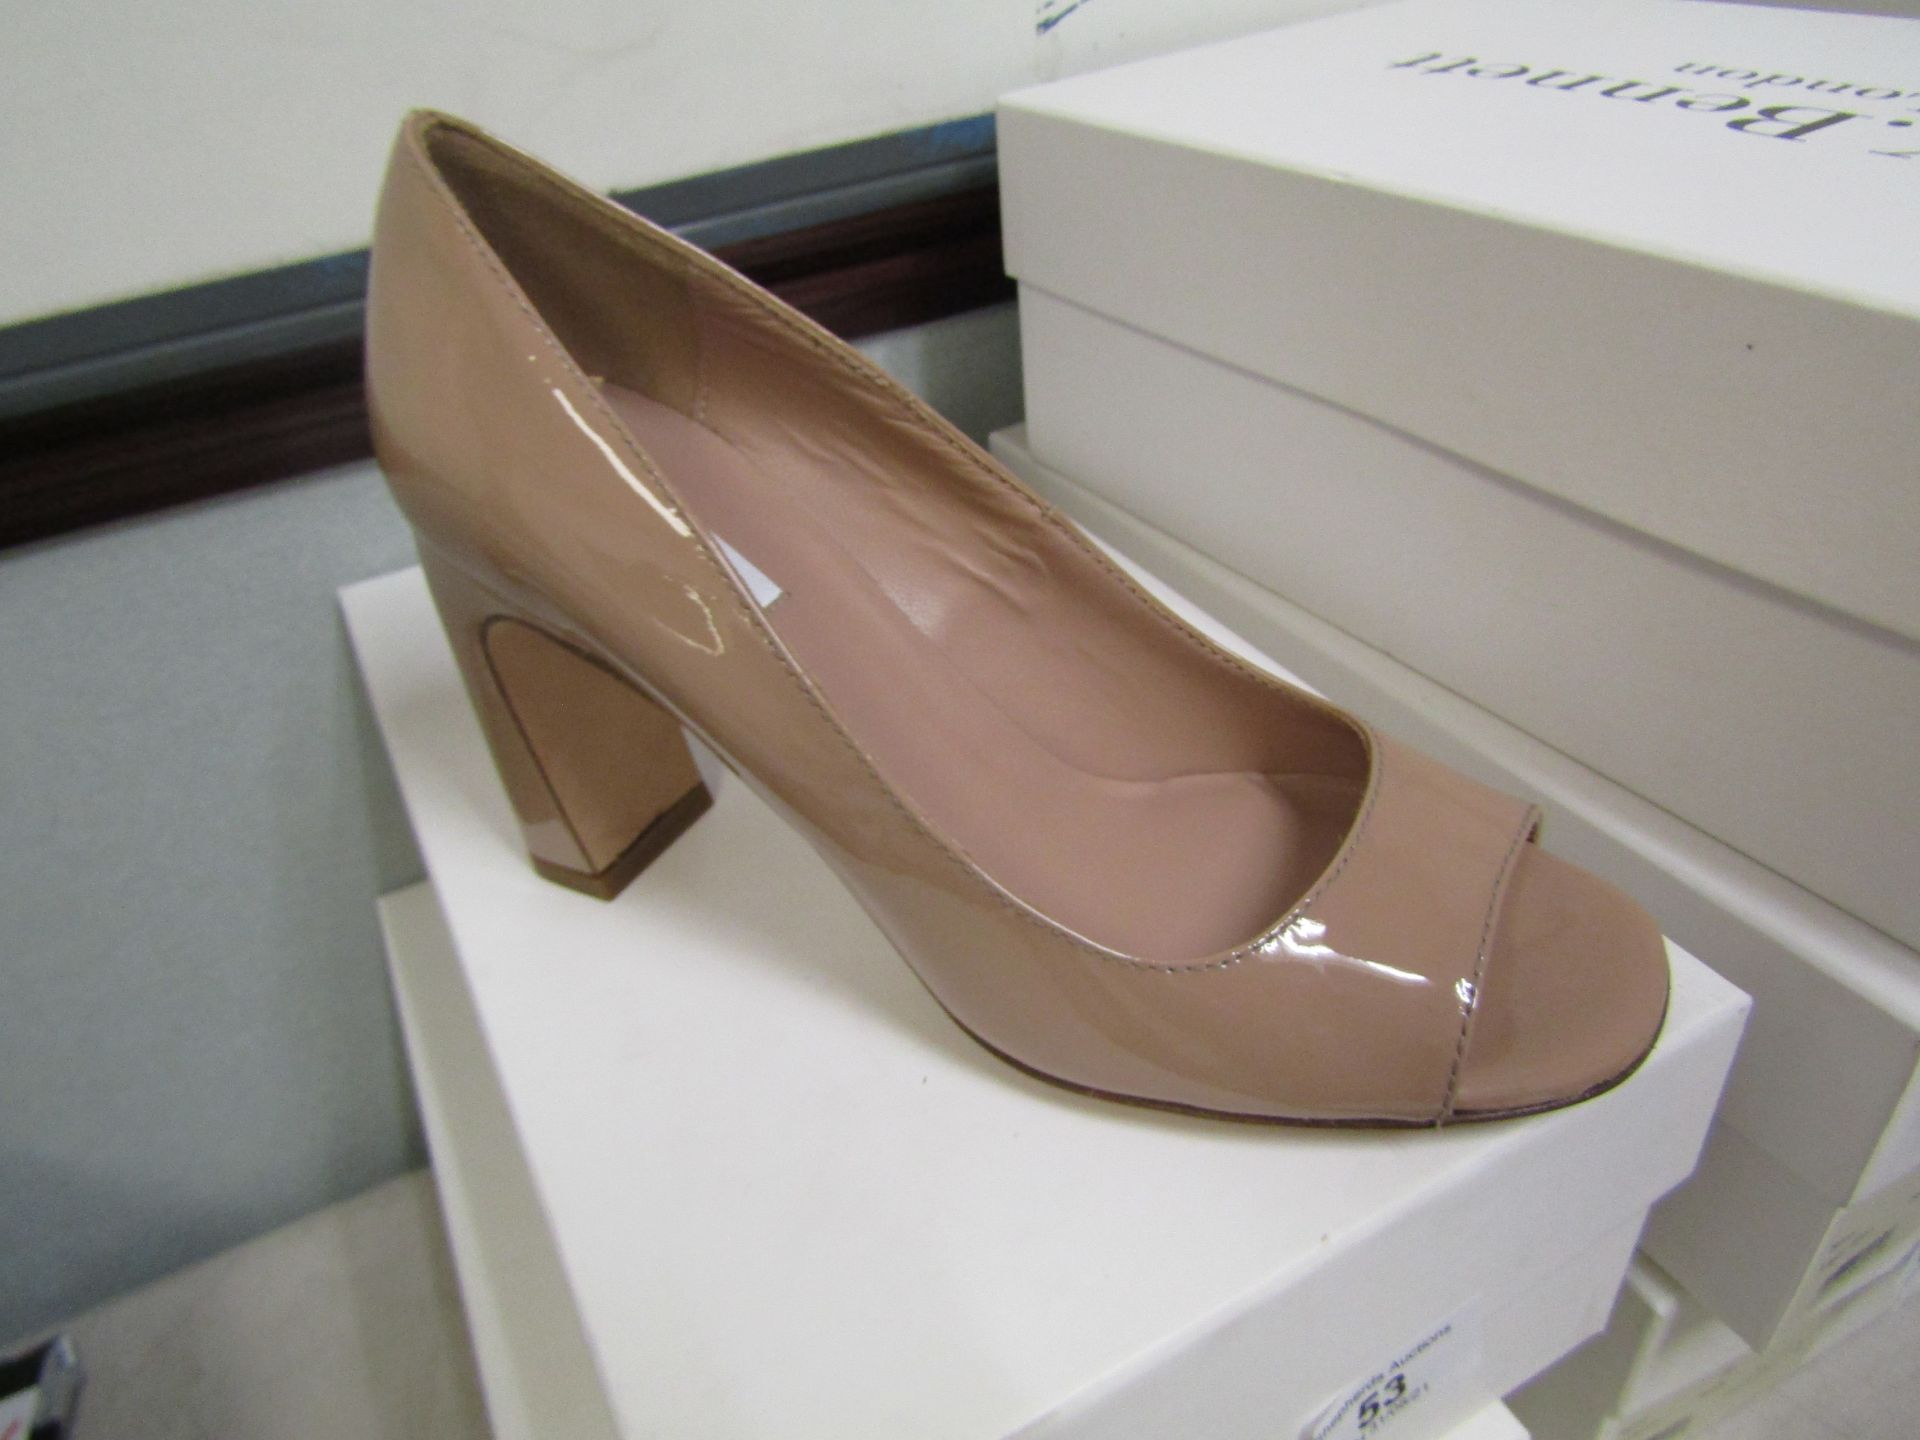 L K Bennett London Harper Nude Patent Shoes size 36 RRP £225 new & boxed see image for design